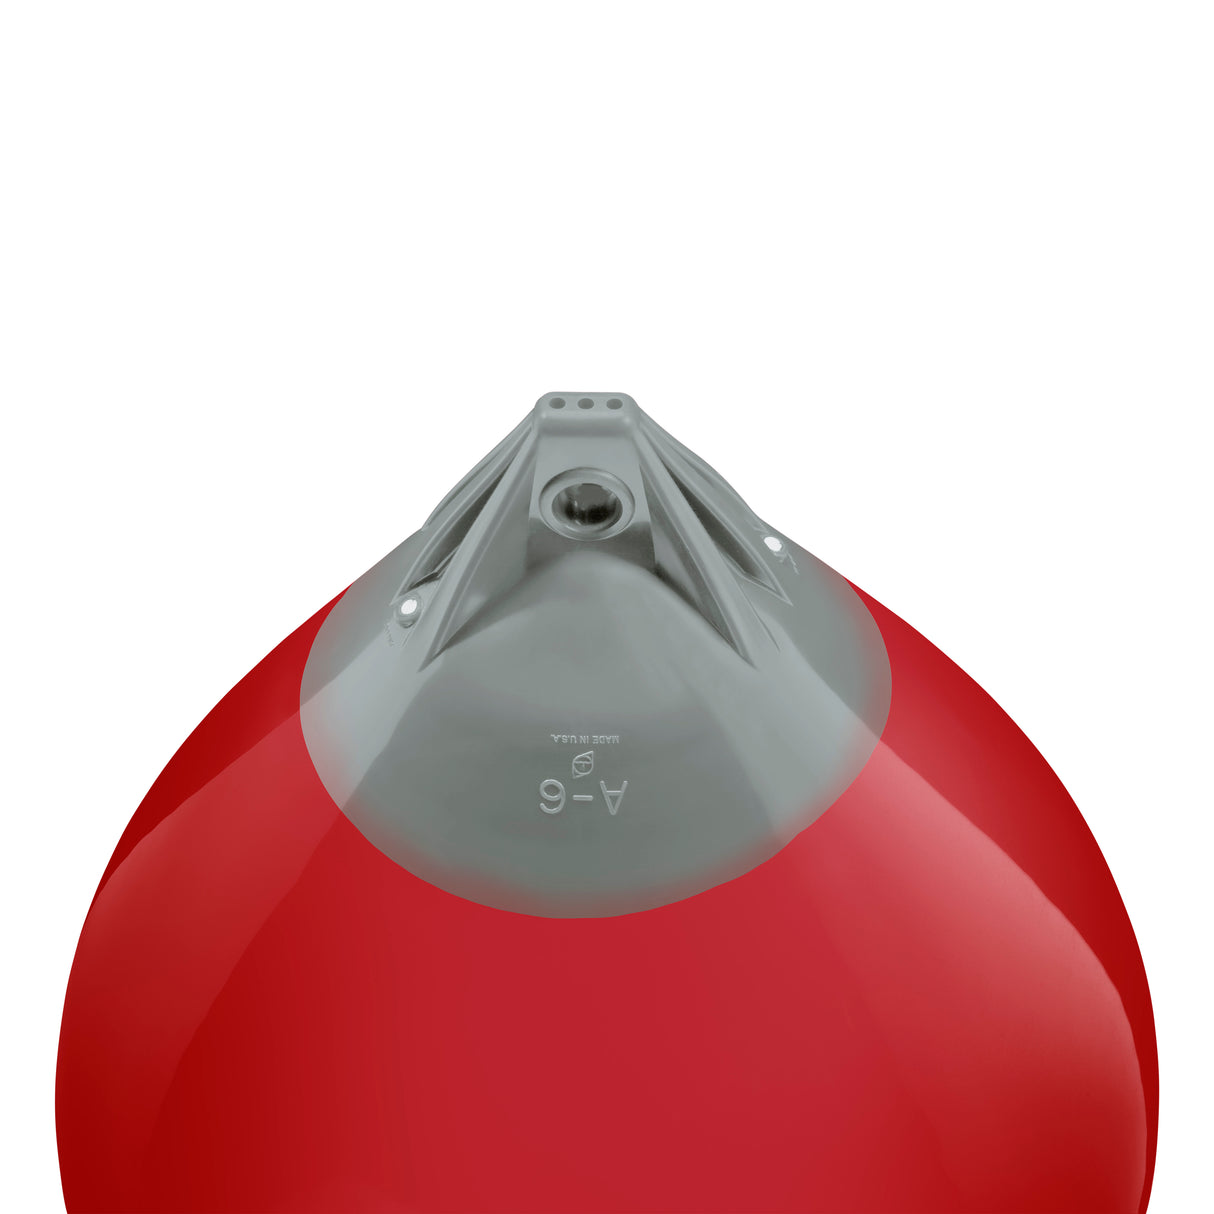 Classic Red buoy with Grey-Top, Polyform A-6 angled shot